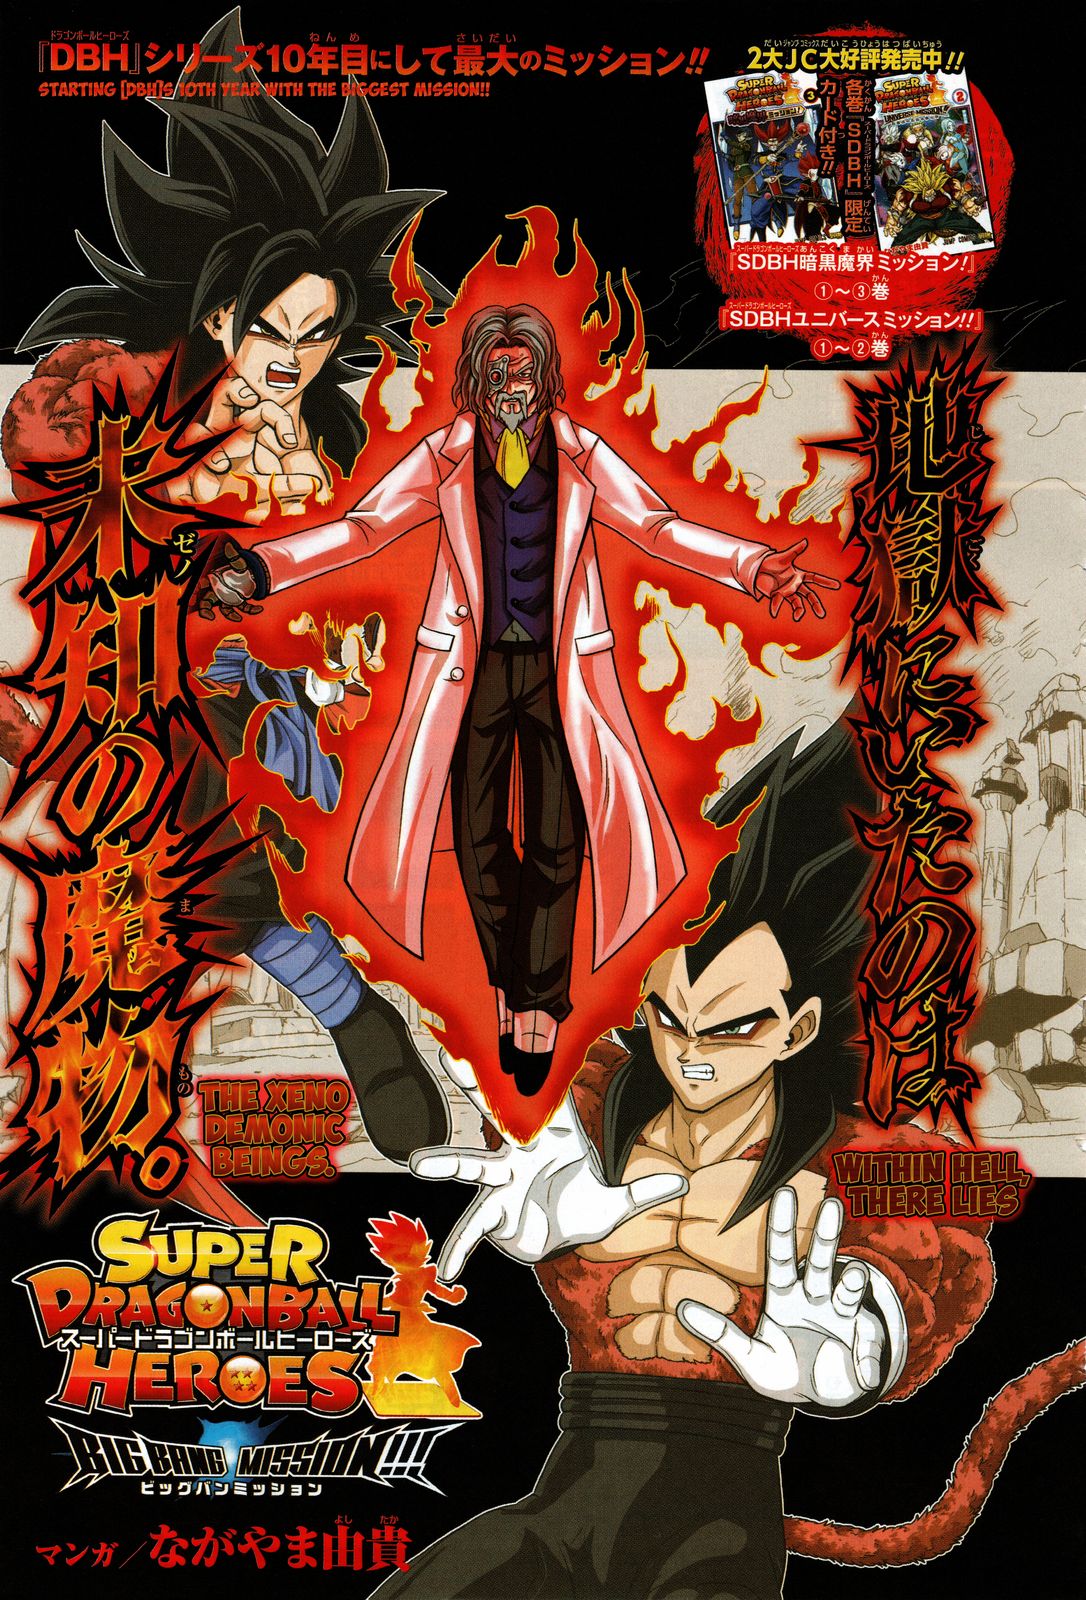 Super Dragon Ball Heroes: Big Bang Mission! Vol.1 Chapter 3: Within Hell, There Lies The Xeno Demonic Beings. - Picture 1